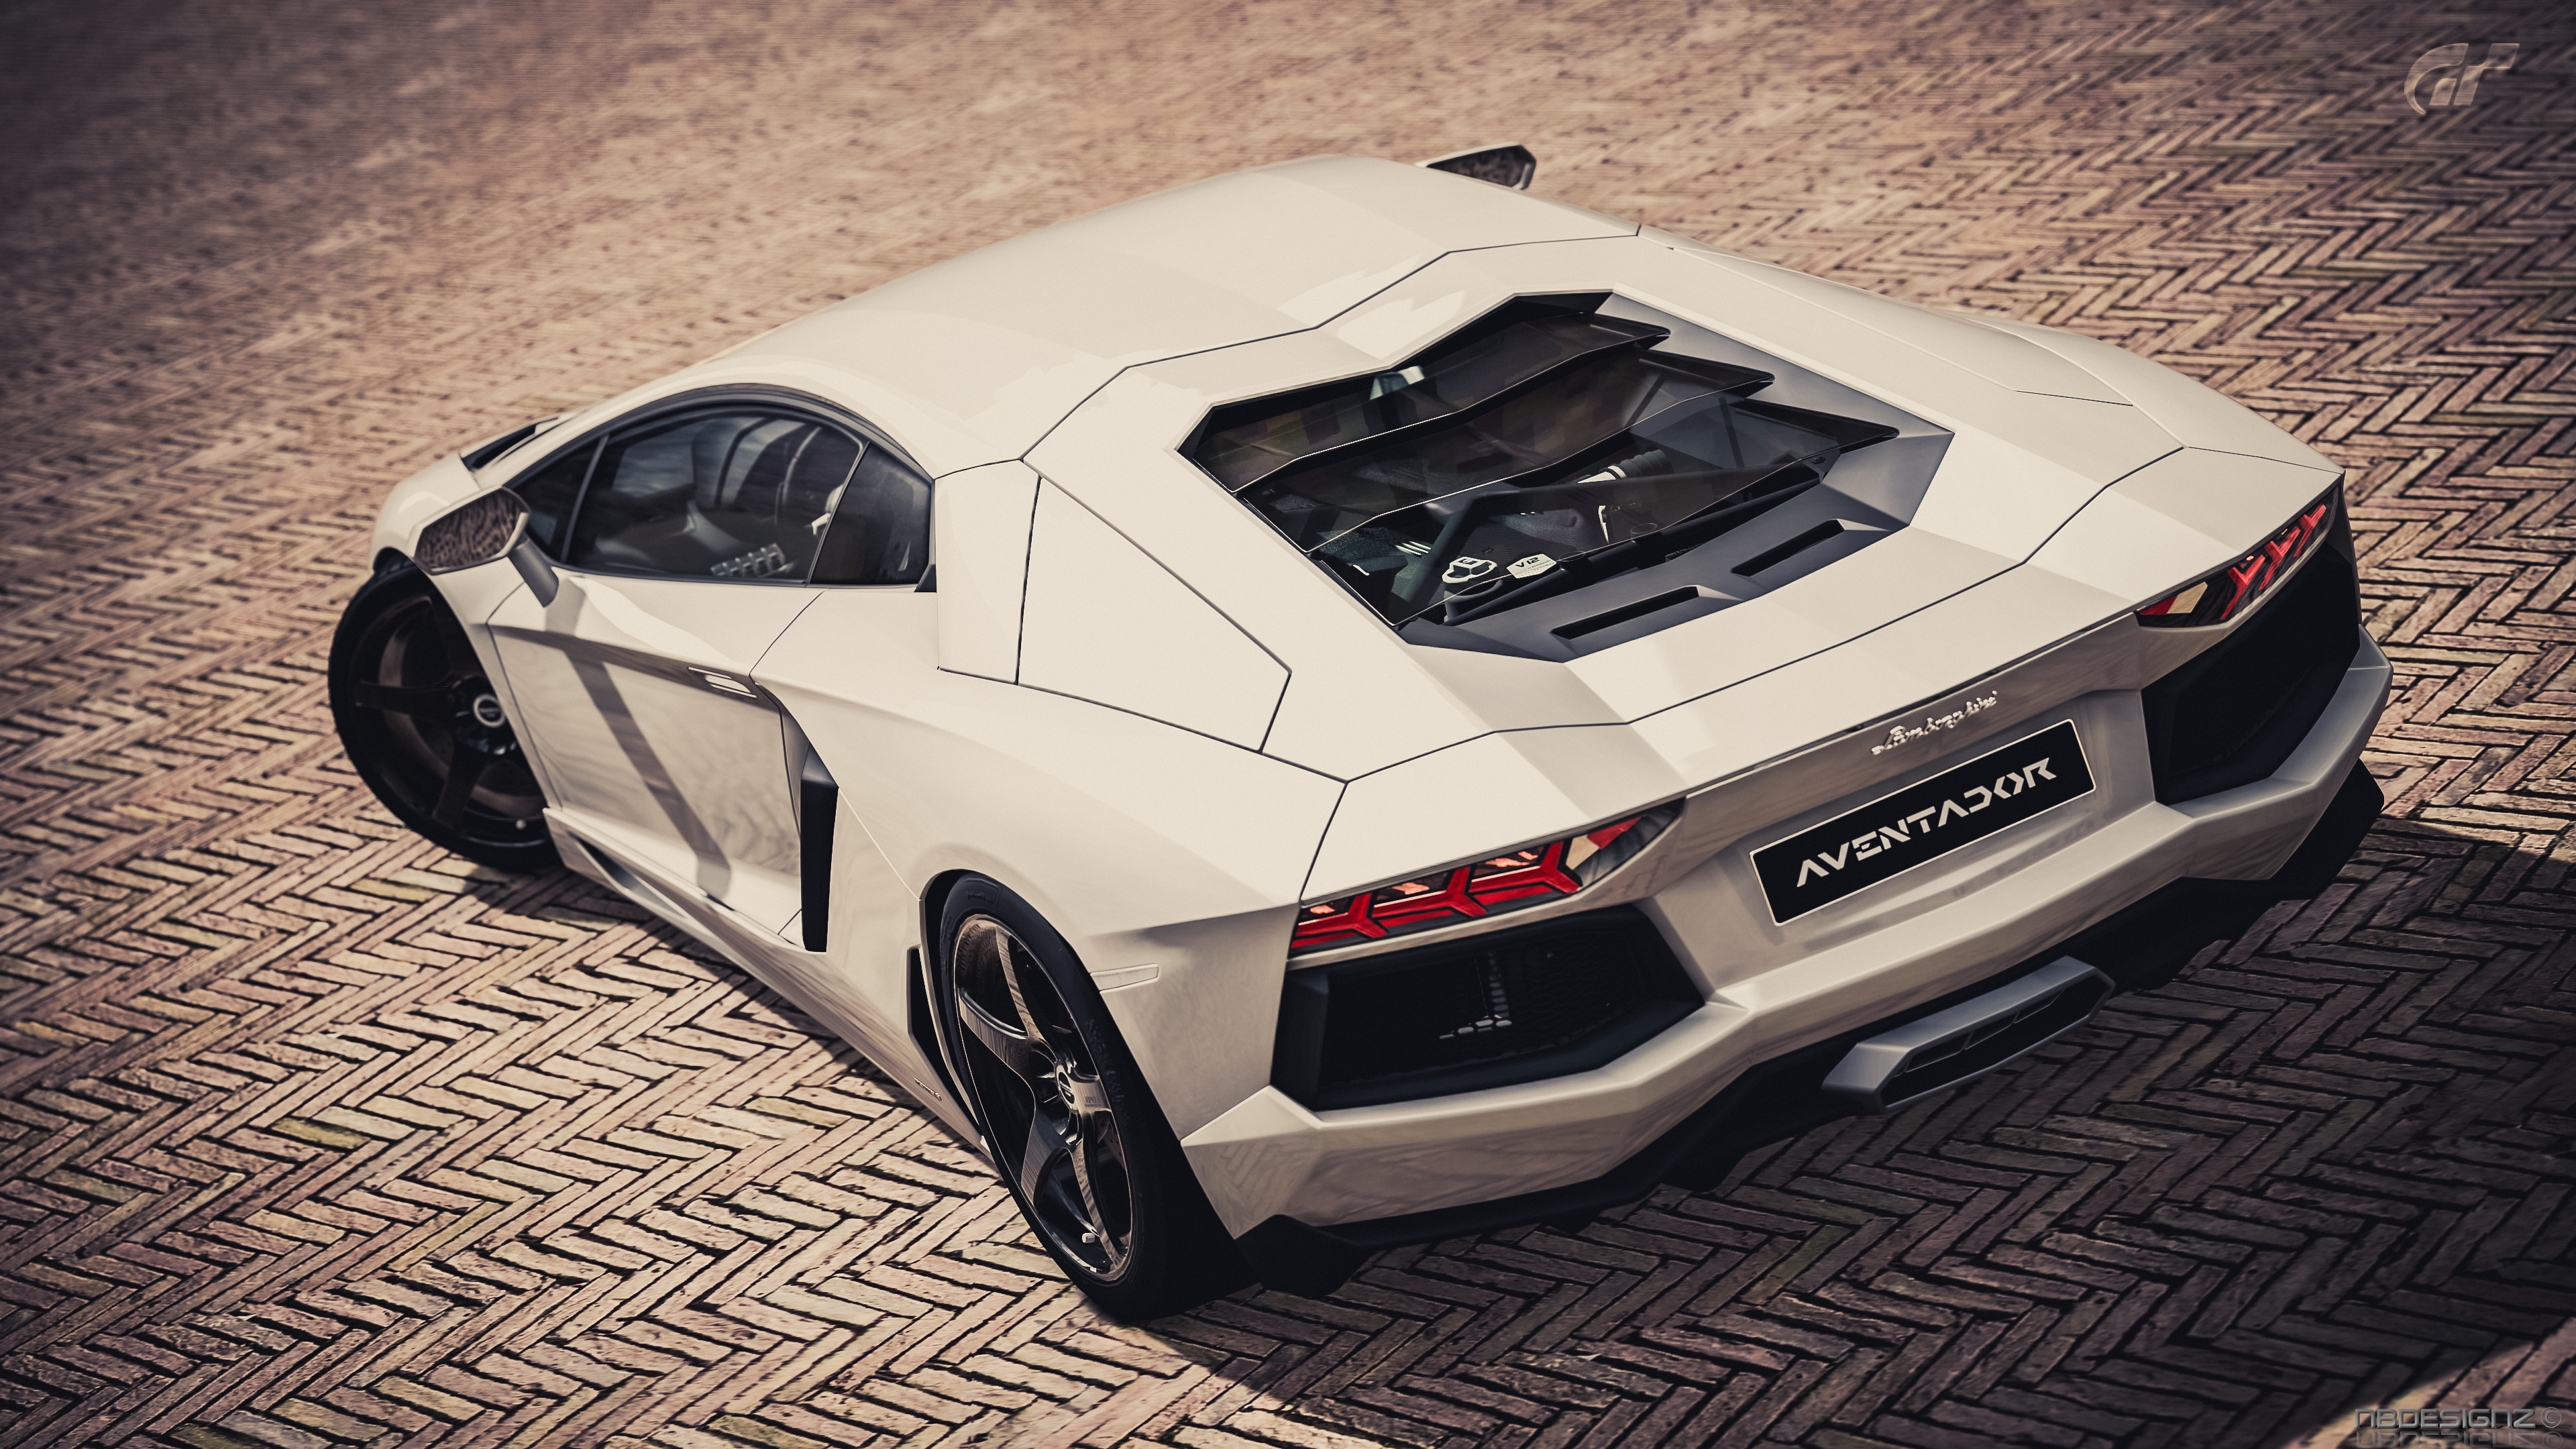 Lamborghini Aventador Pictures On HD Wallpaper Only Model